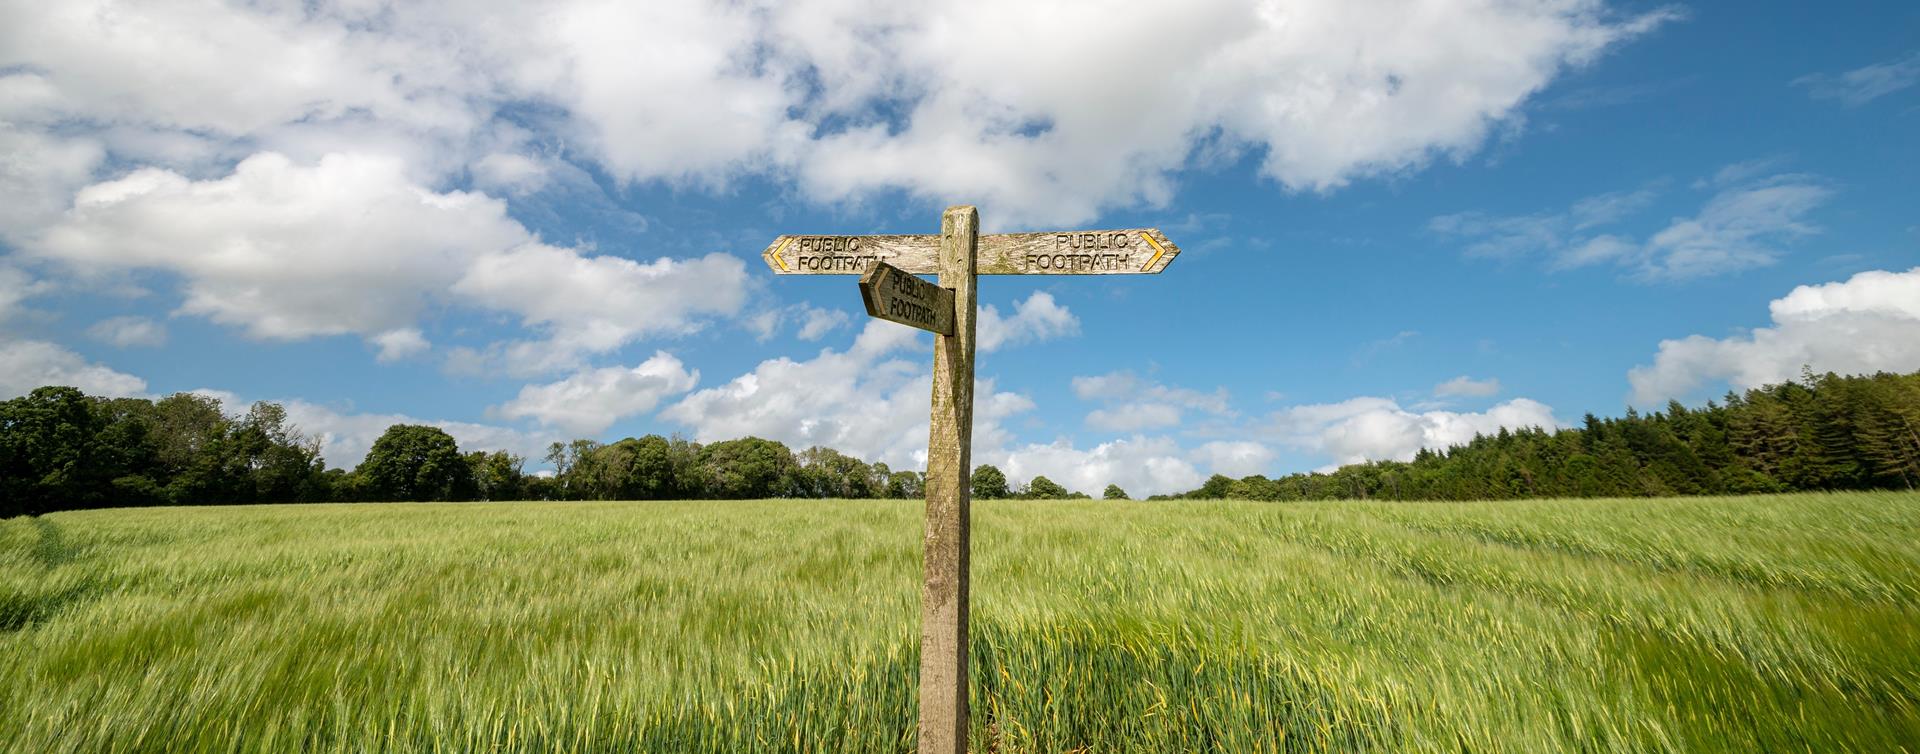 The Right to Roam: Public Rights of Way in the UK